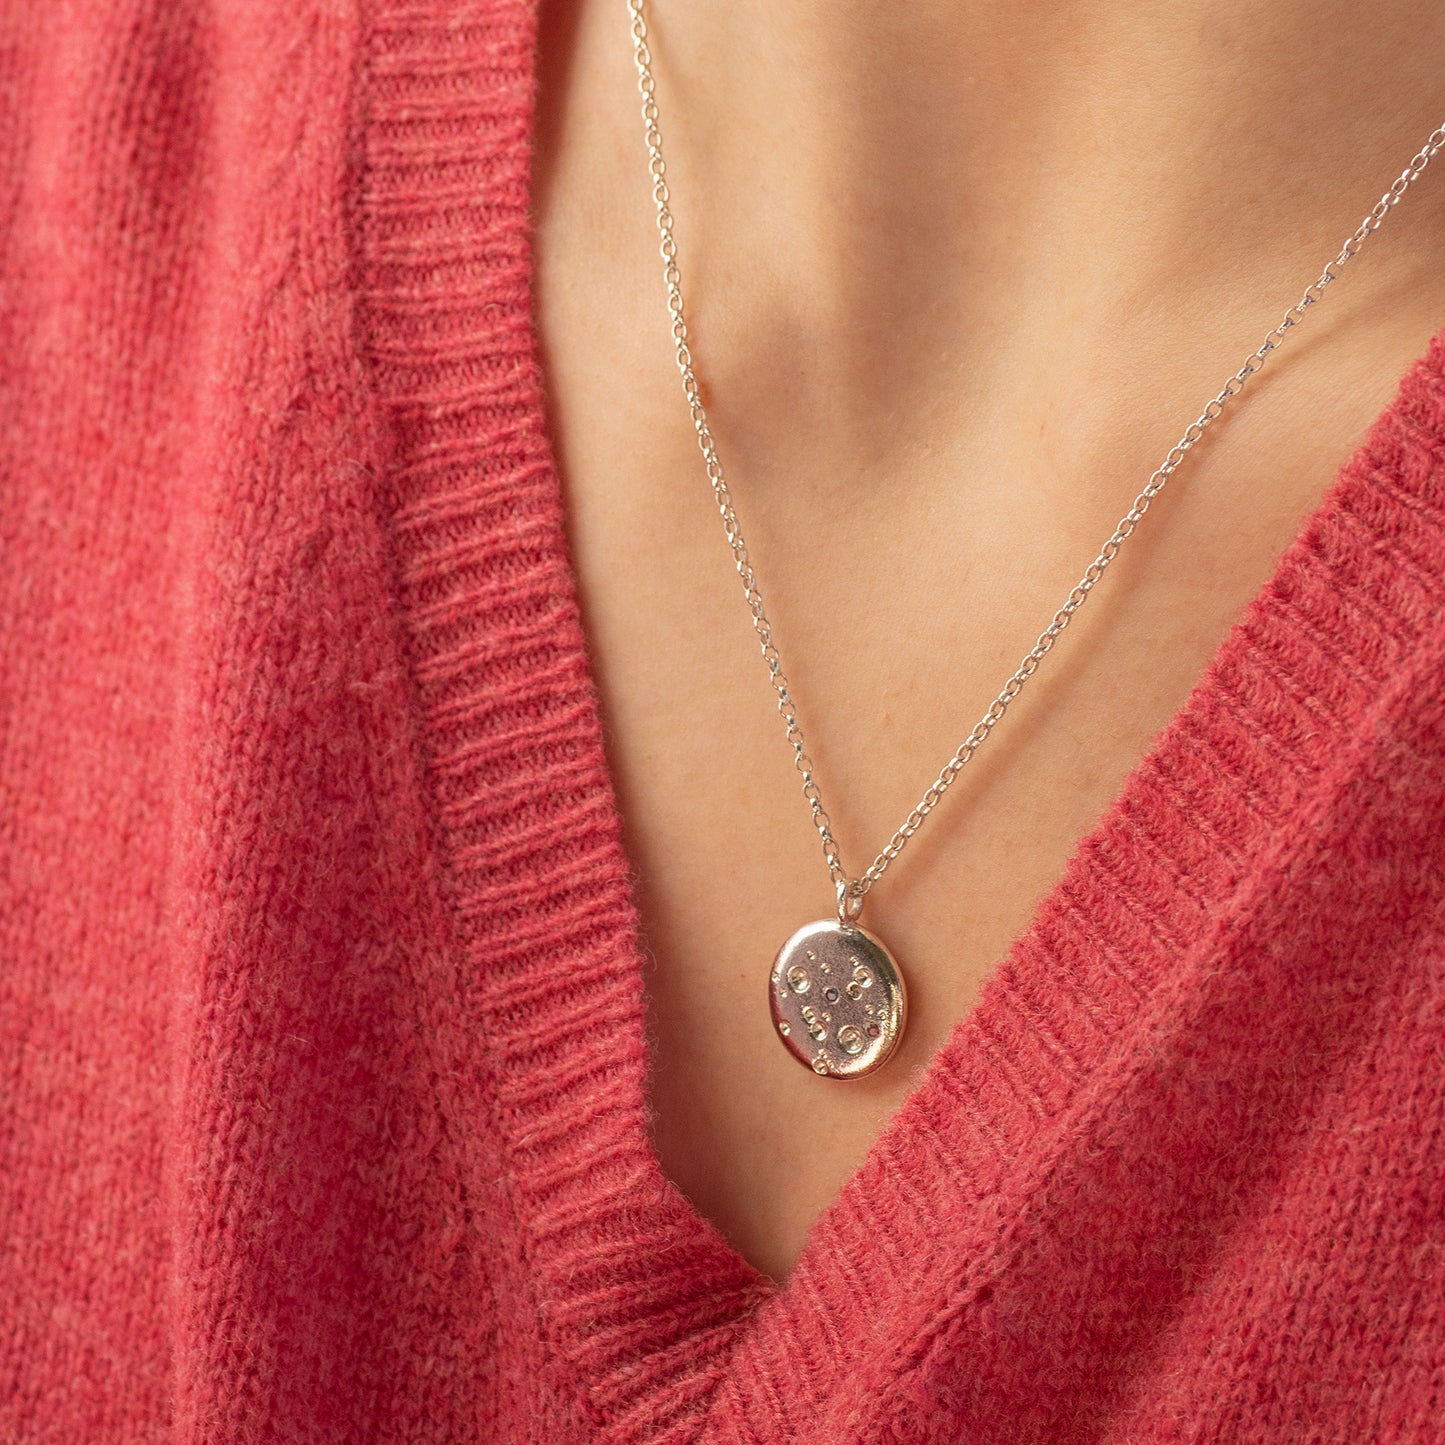 Double Birthstone Felicity Necklace - Silver